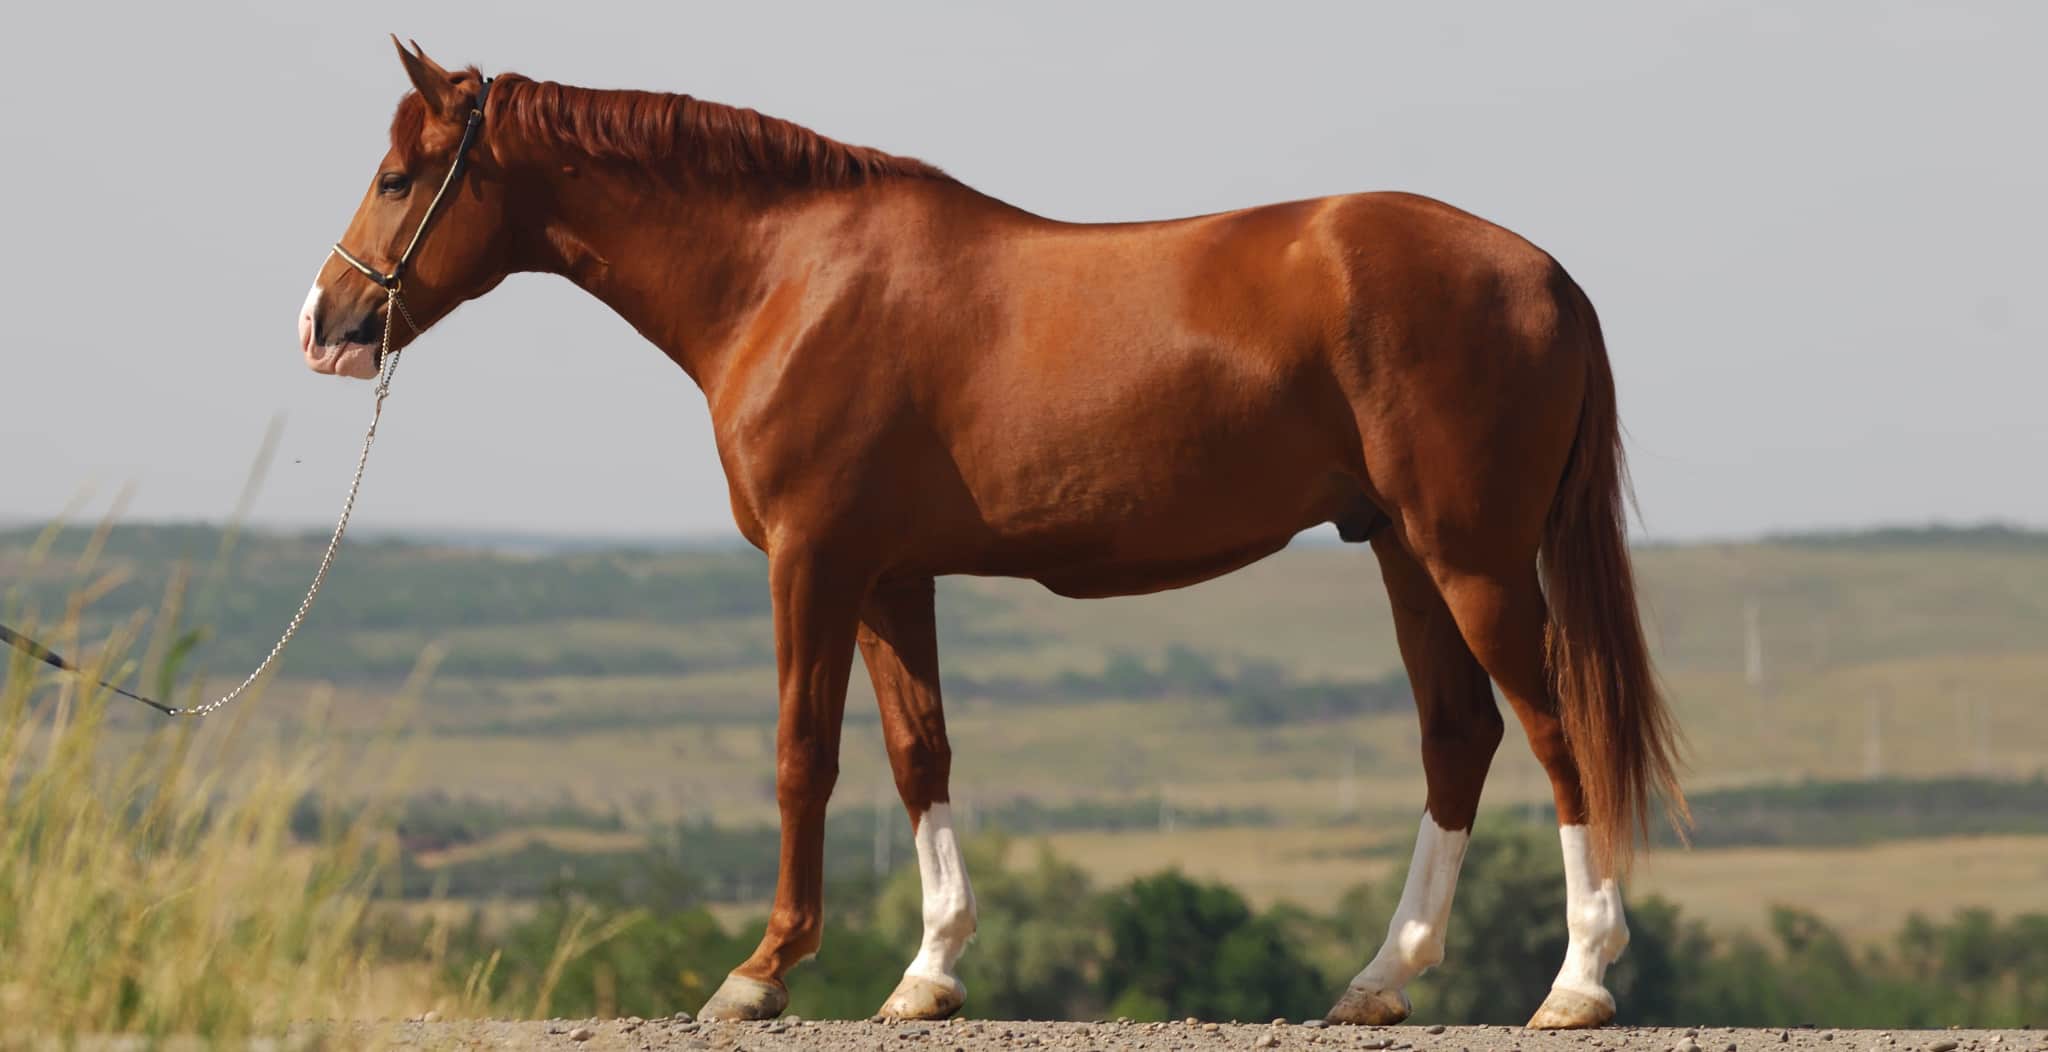 Edema in horses. Inflammation and Swelling in Horses image of horse with Equine Ventral Edema in belly.